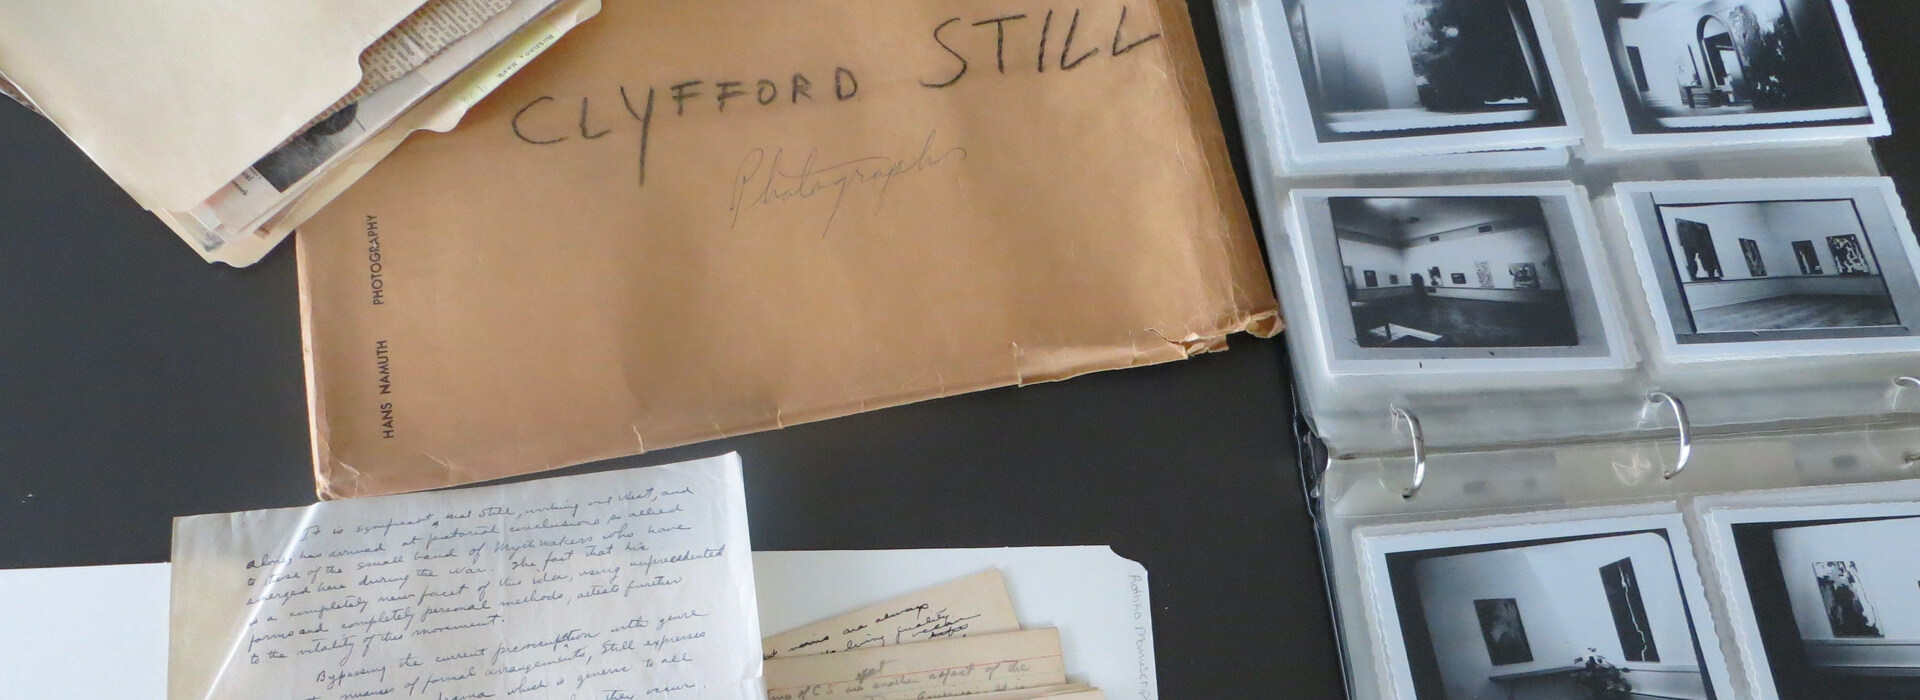 Photos, files, and papers from the Clyfford Still Museum Archives